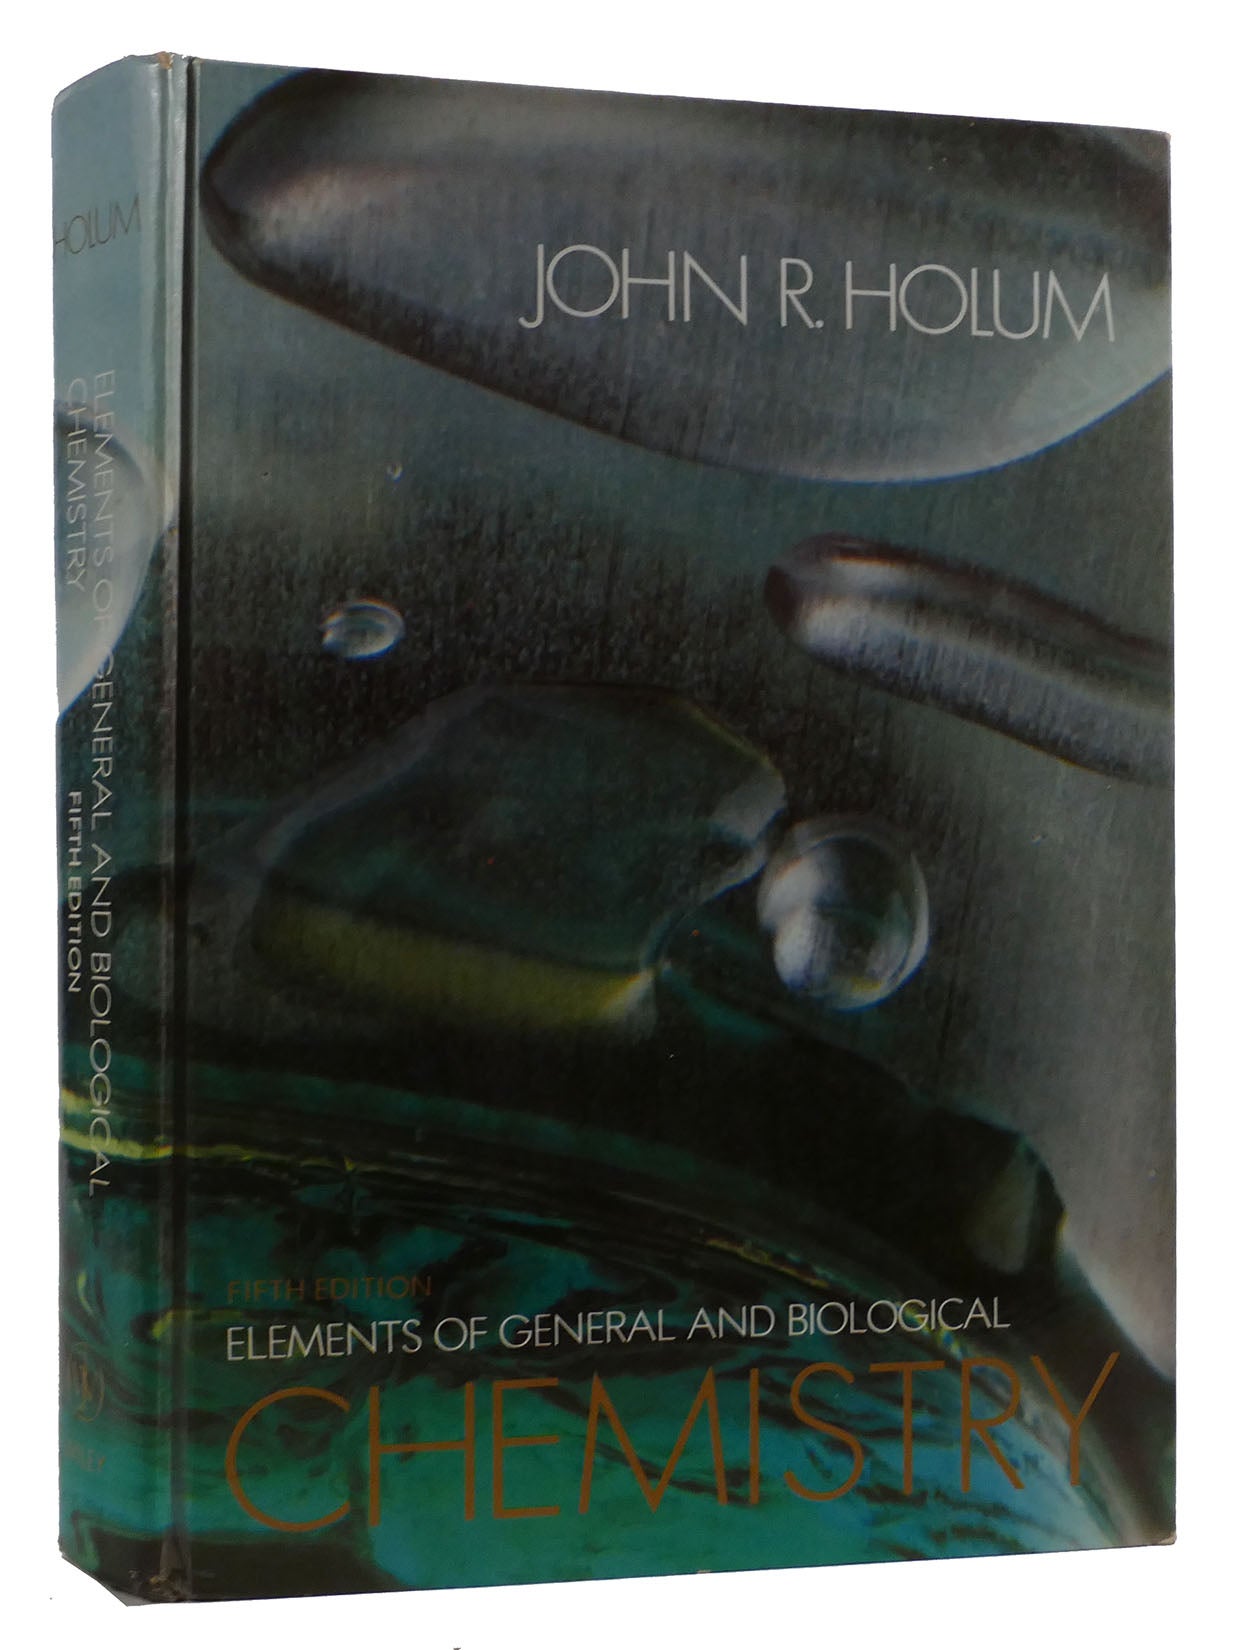 Holum　An　to　BIOLOGICAL　ELEMENTS　AND　GENERAL　Introduction　Life　First　Edition;　John　Basis　the　Molecular　Fifth　CHEMISTRY　R.　of　OF　Printing